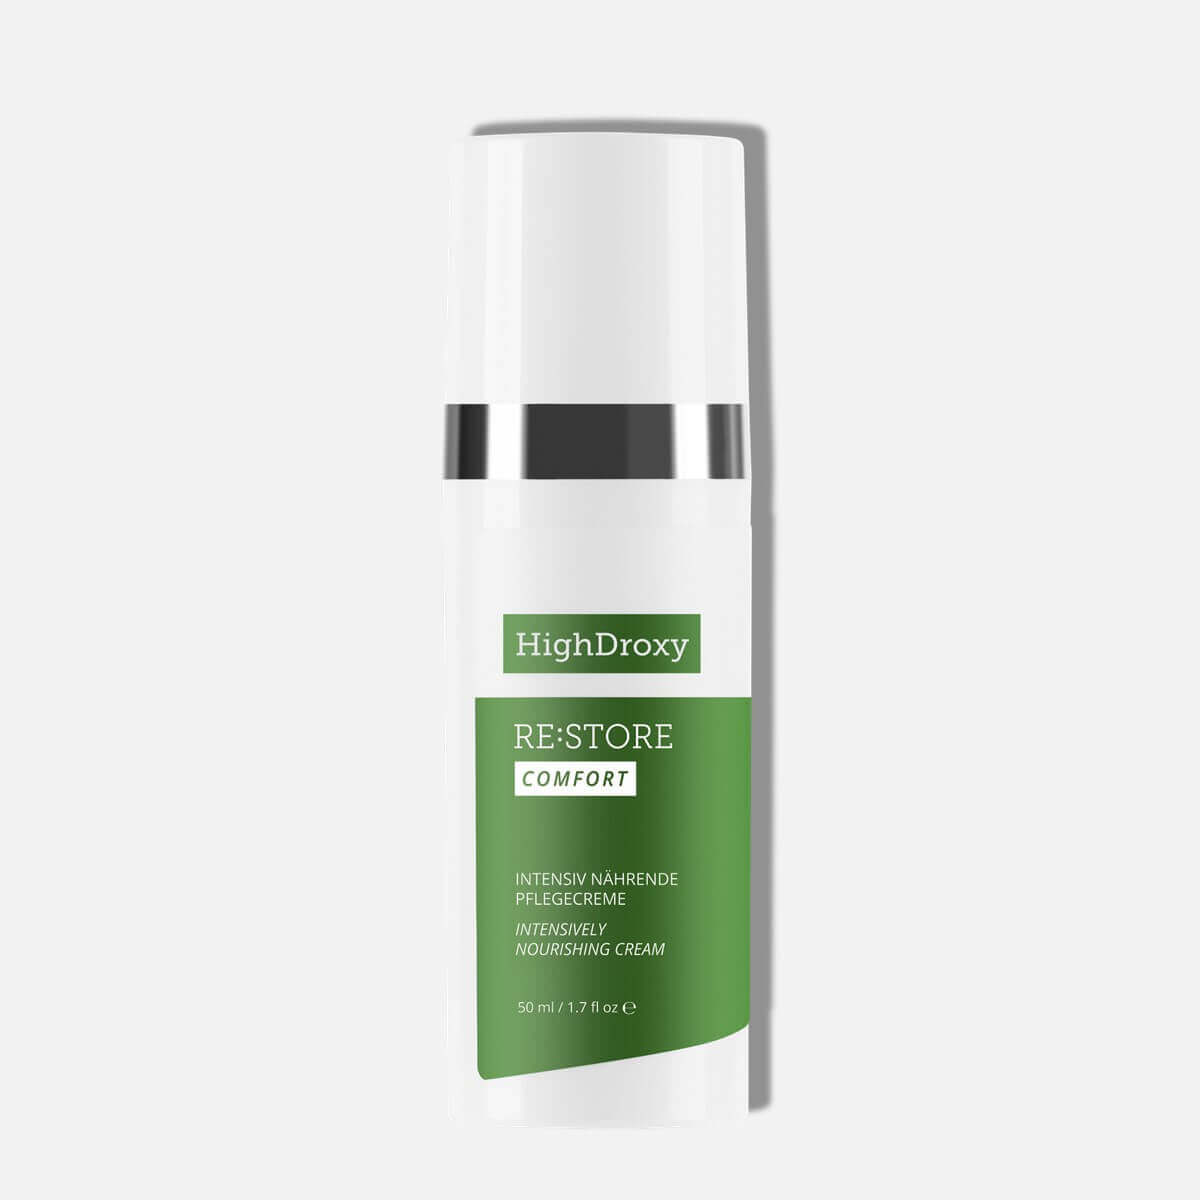 Full size of Restore Comfort cream from HighDroxy against gray background